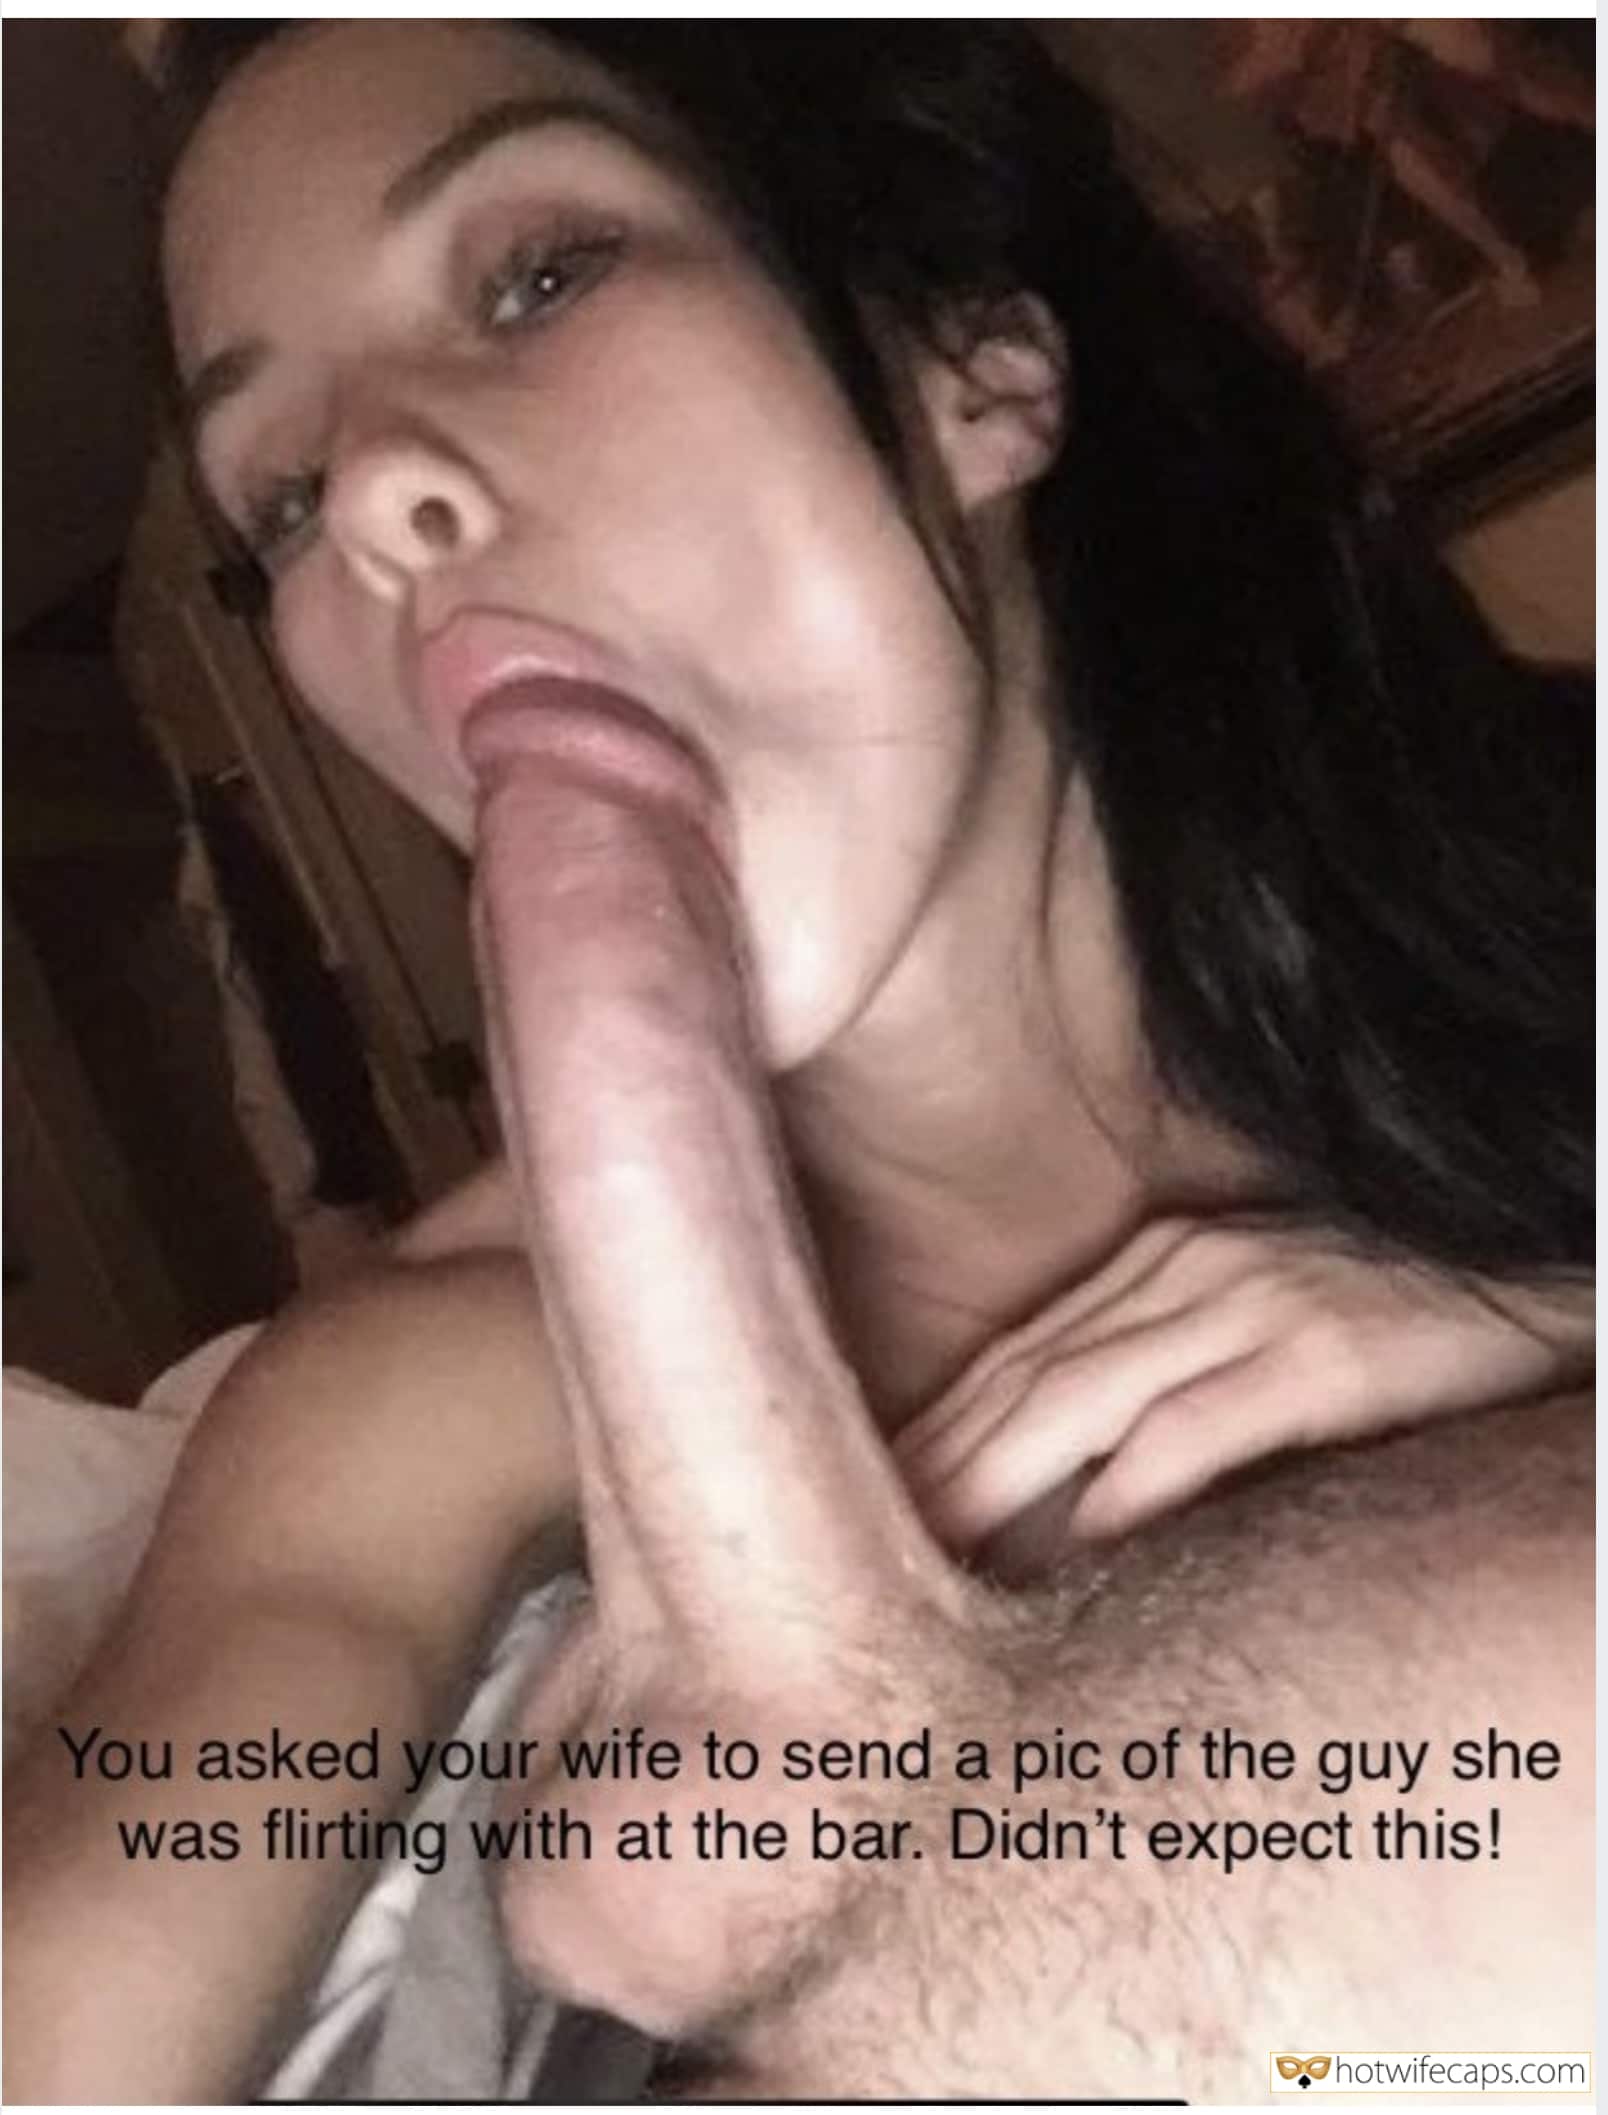 Cheating Blowjob Bigger Cock hotwife caption: You asked your wife to send a pic of the guy she was flirting with at the bar. Didn’t expect this! gay cock lsuck captions hotwife online flirt caption Sucking His Big Pulsating Dick Head